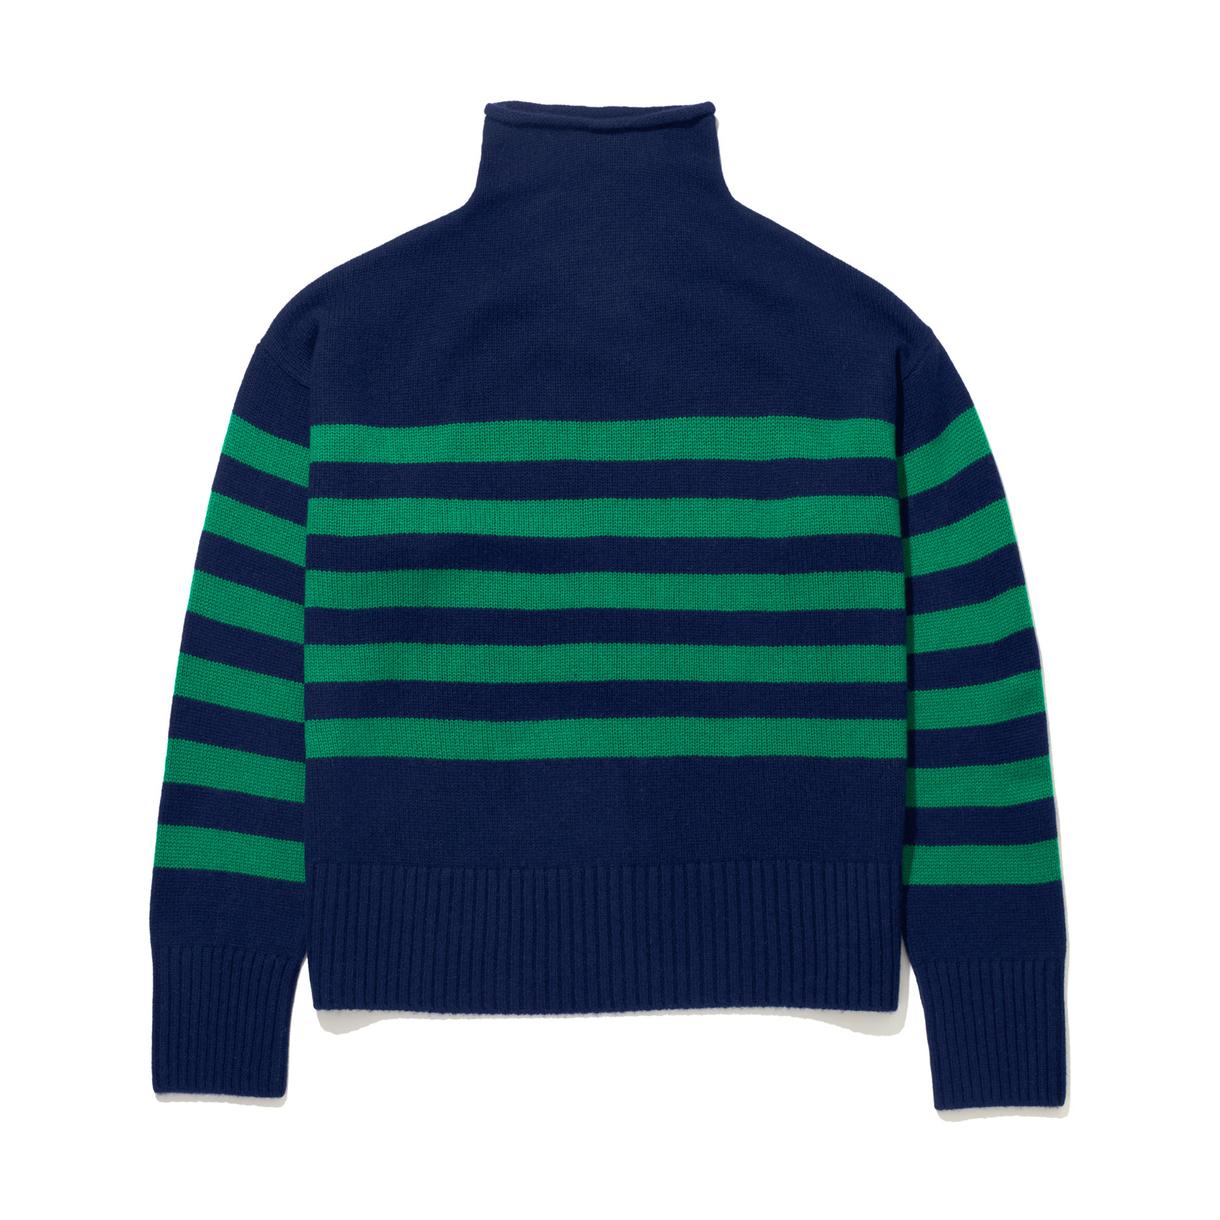 KULE The Lucca Sweater